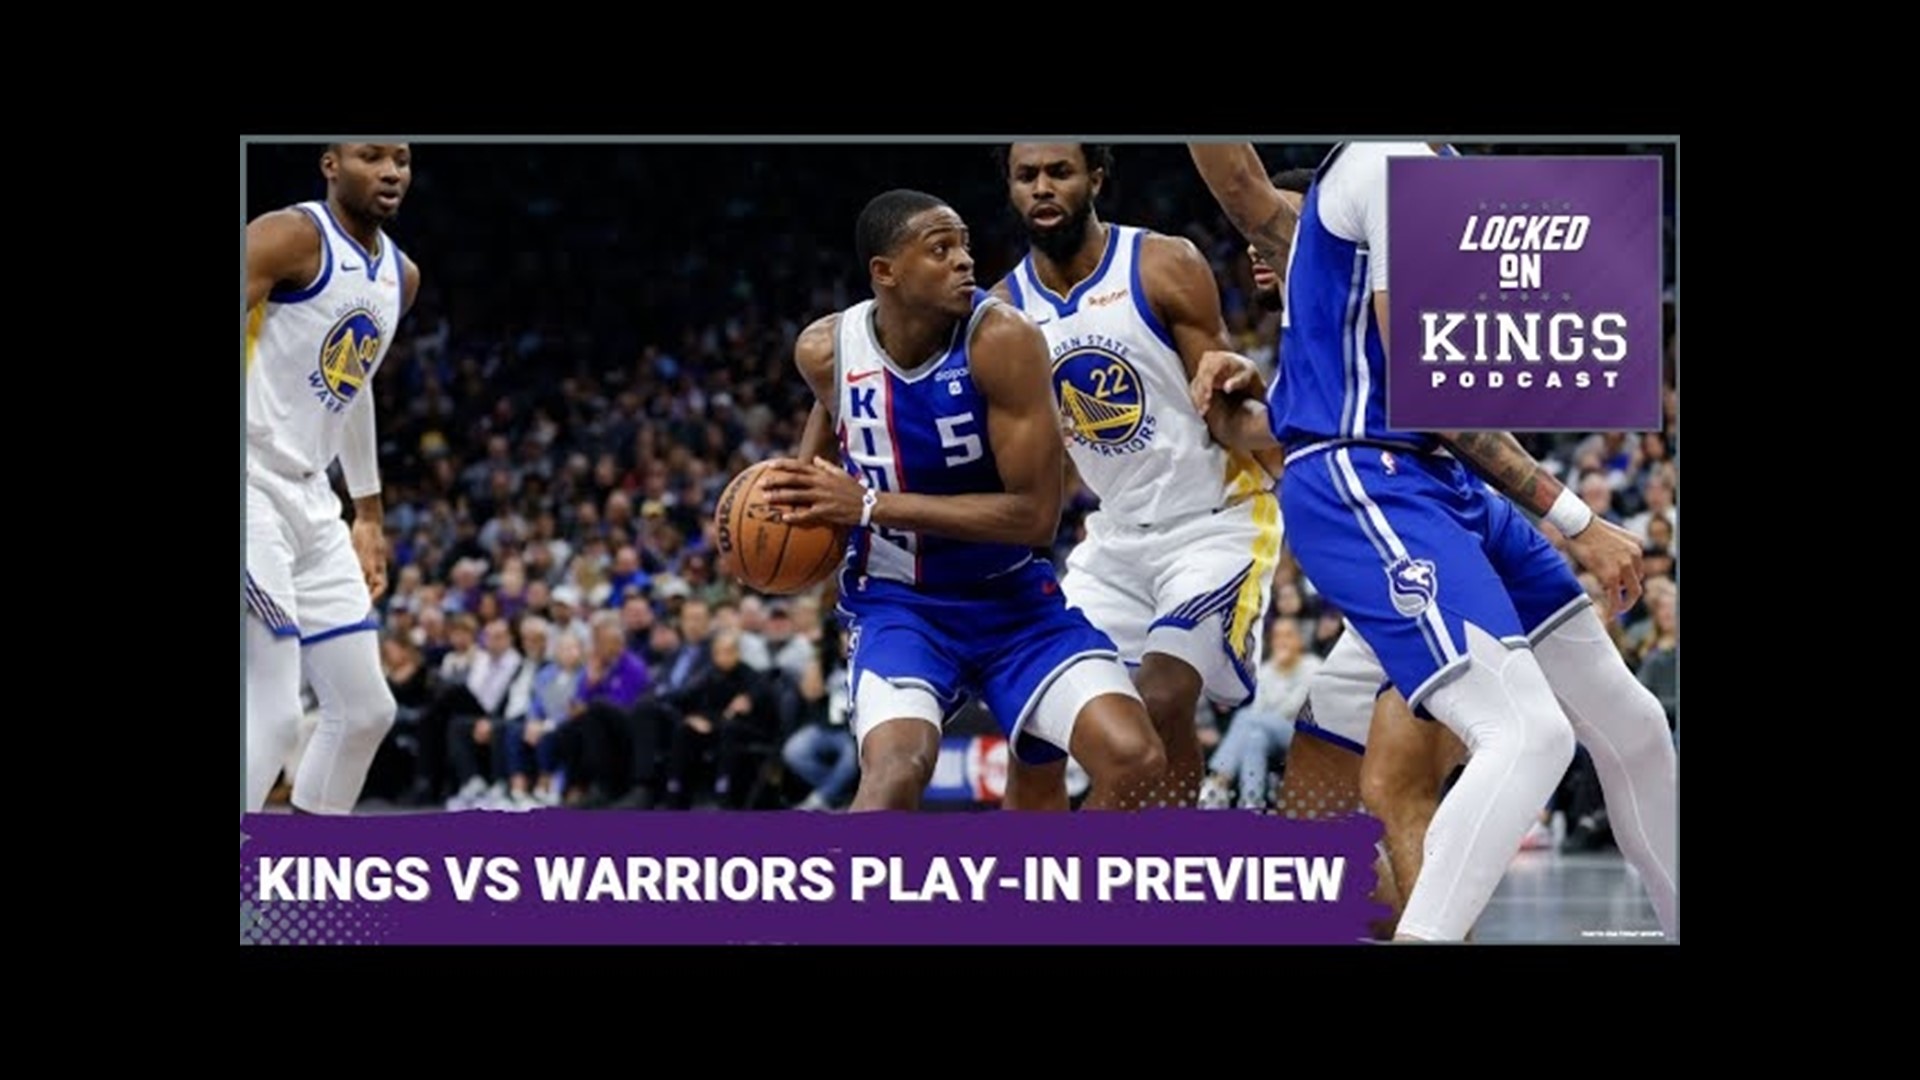 The Locked On tradition of a postseason crossover episode continues as the hosts of Locked On Kings and Locked On Warriors preview an exciting play-in game.